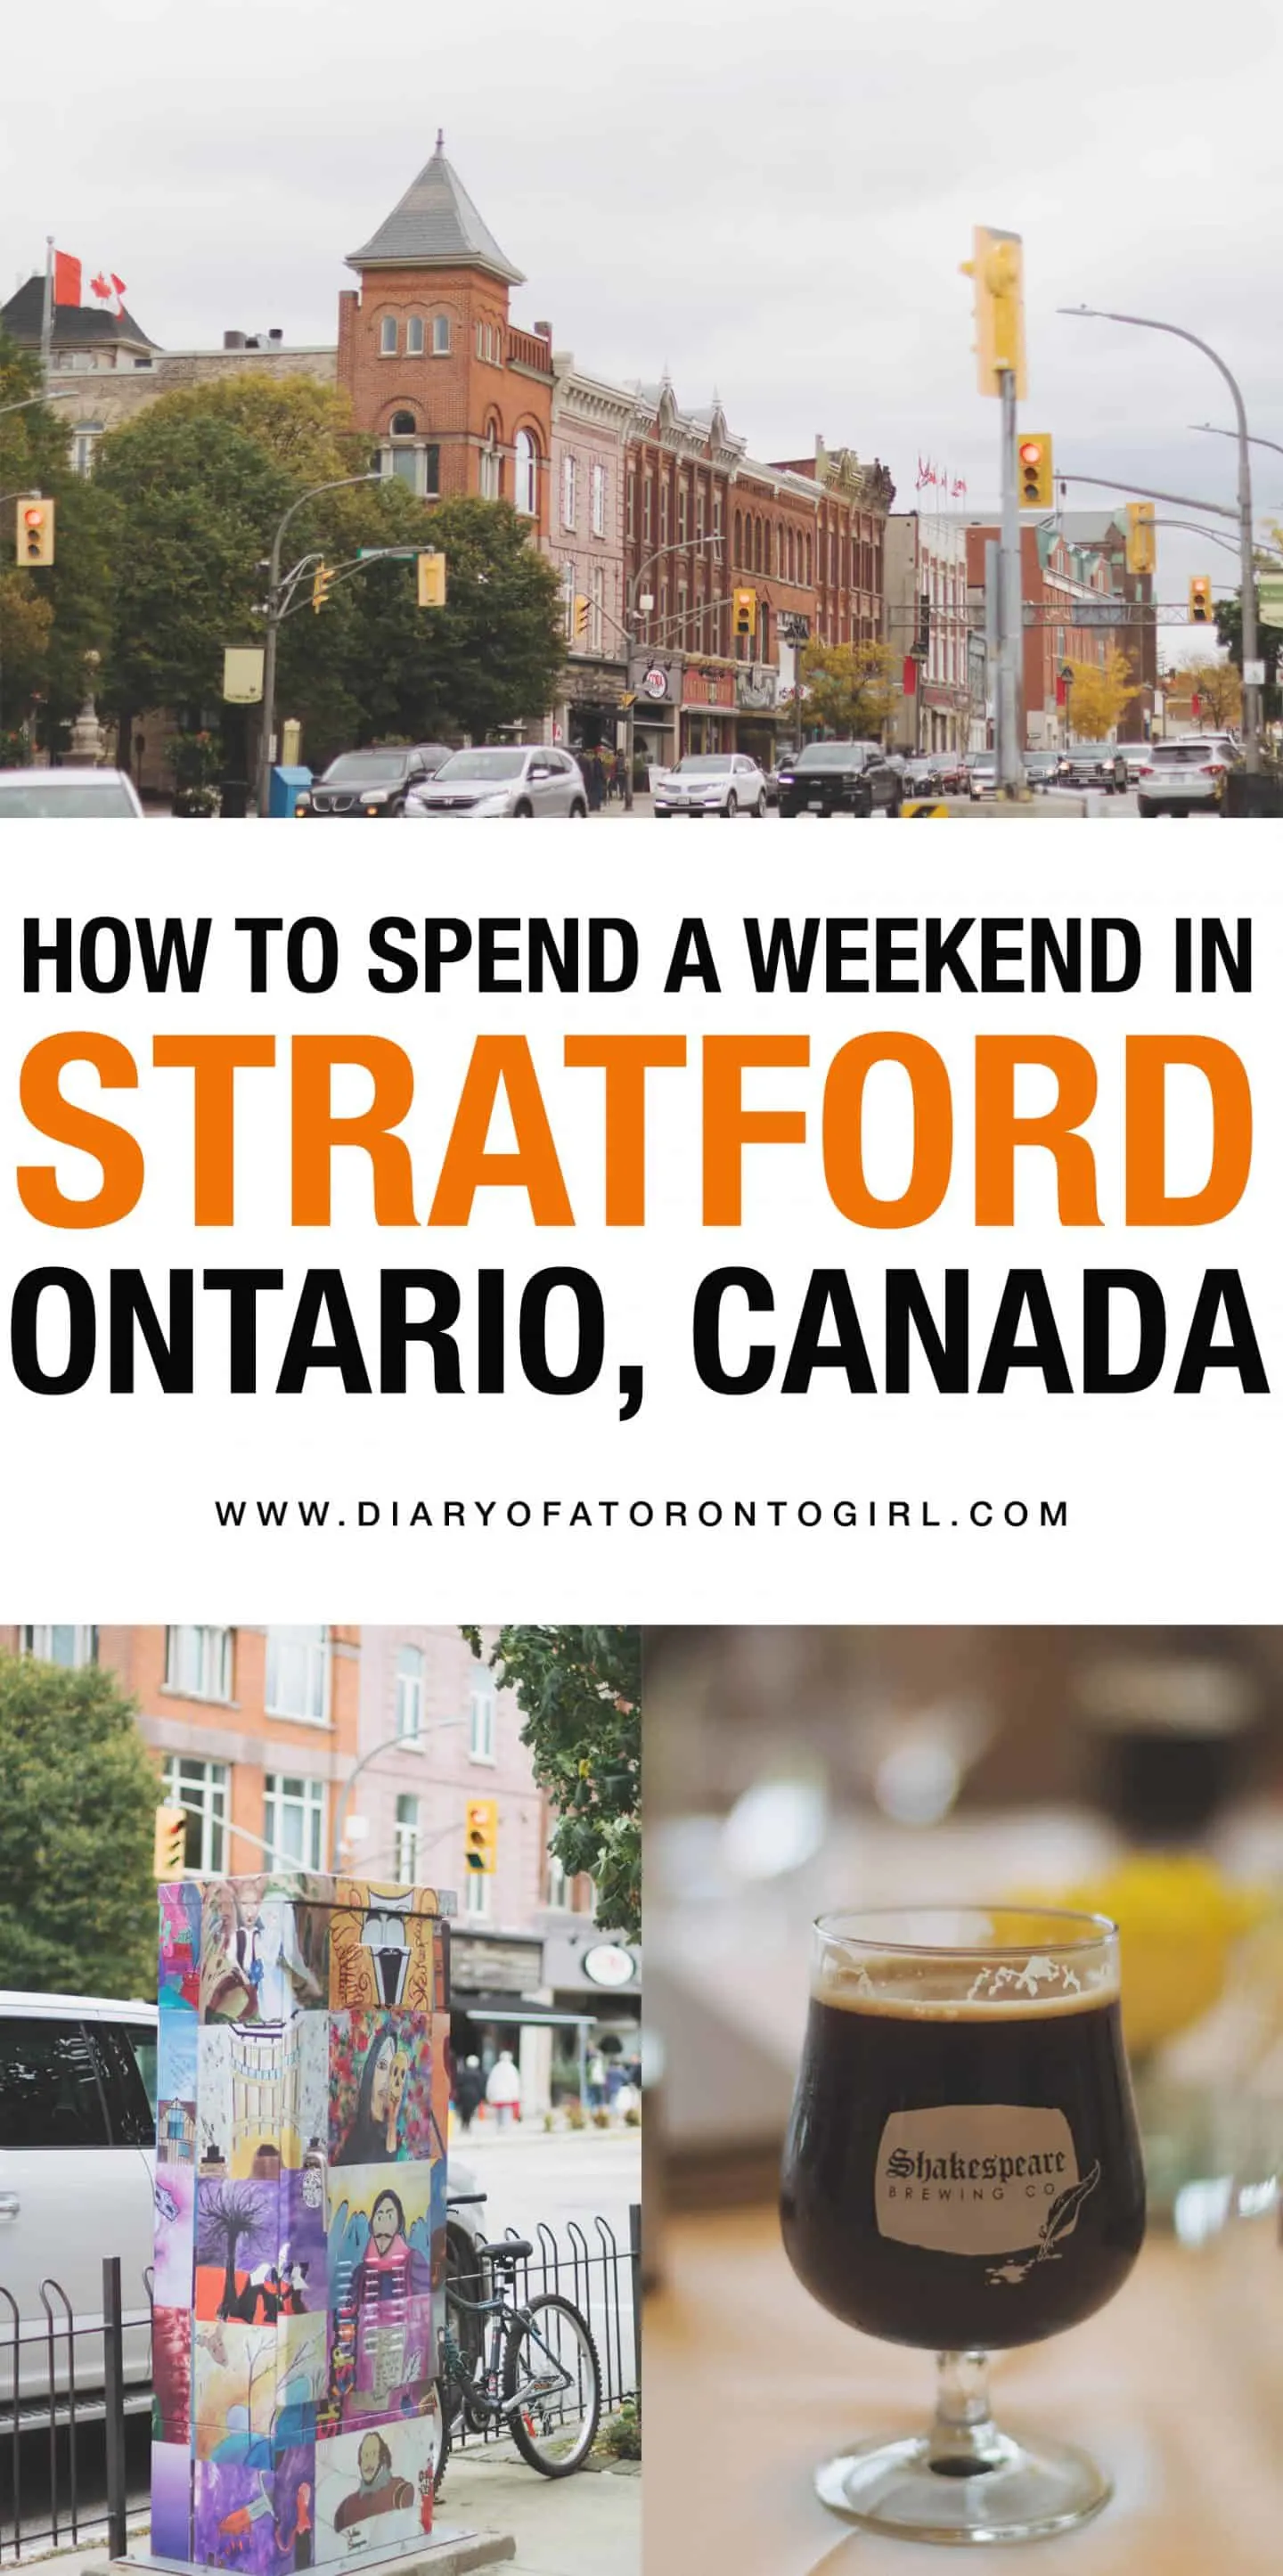 The ultimate guide on what to do, where to stay, and the top restaurants to eat at while you're visiting Stratford, one of the best places for arts and culture in Ontario!